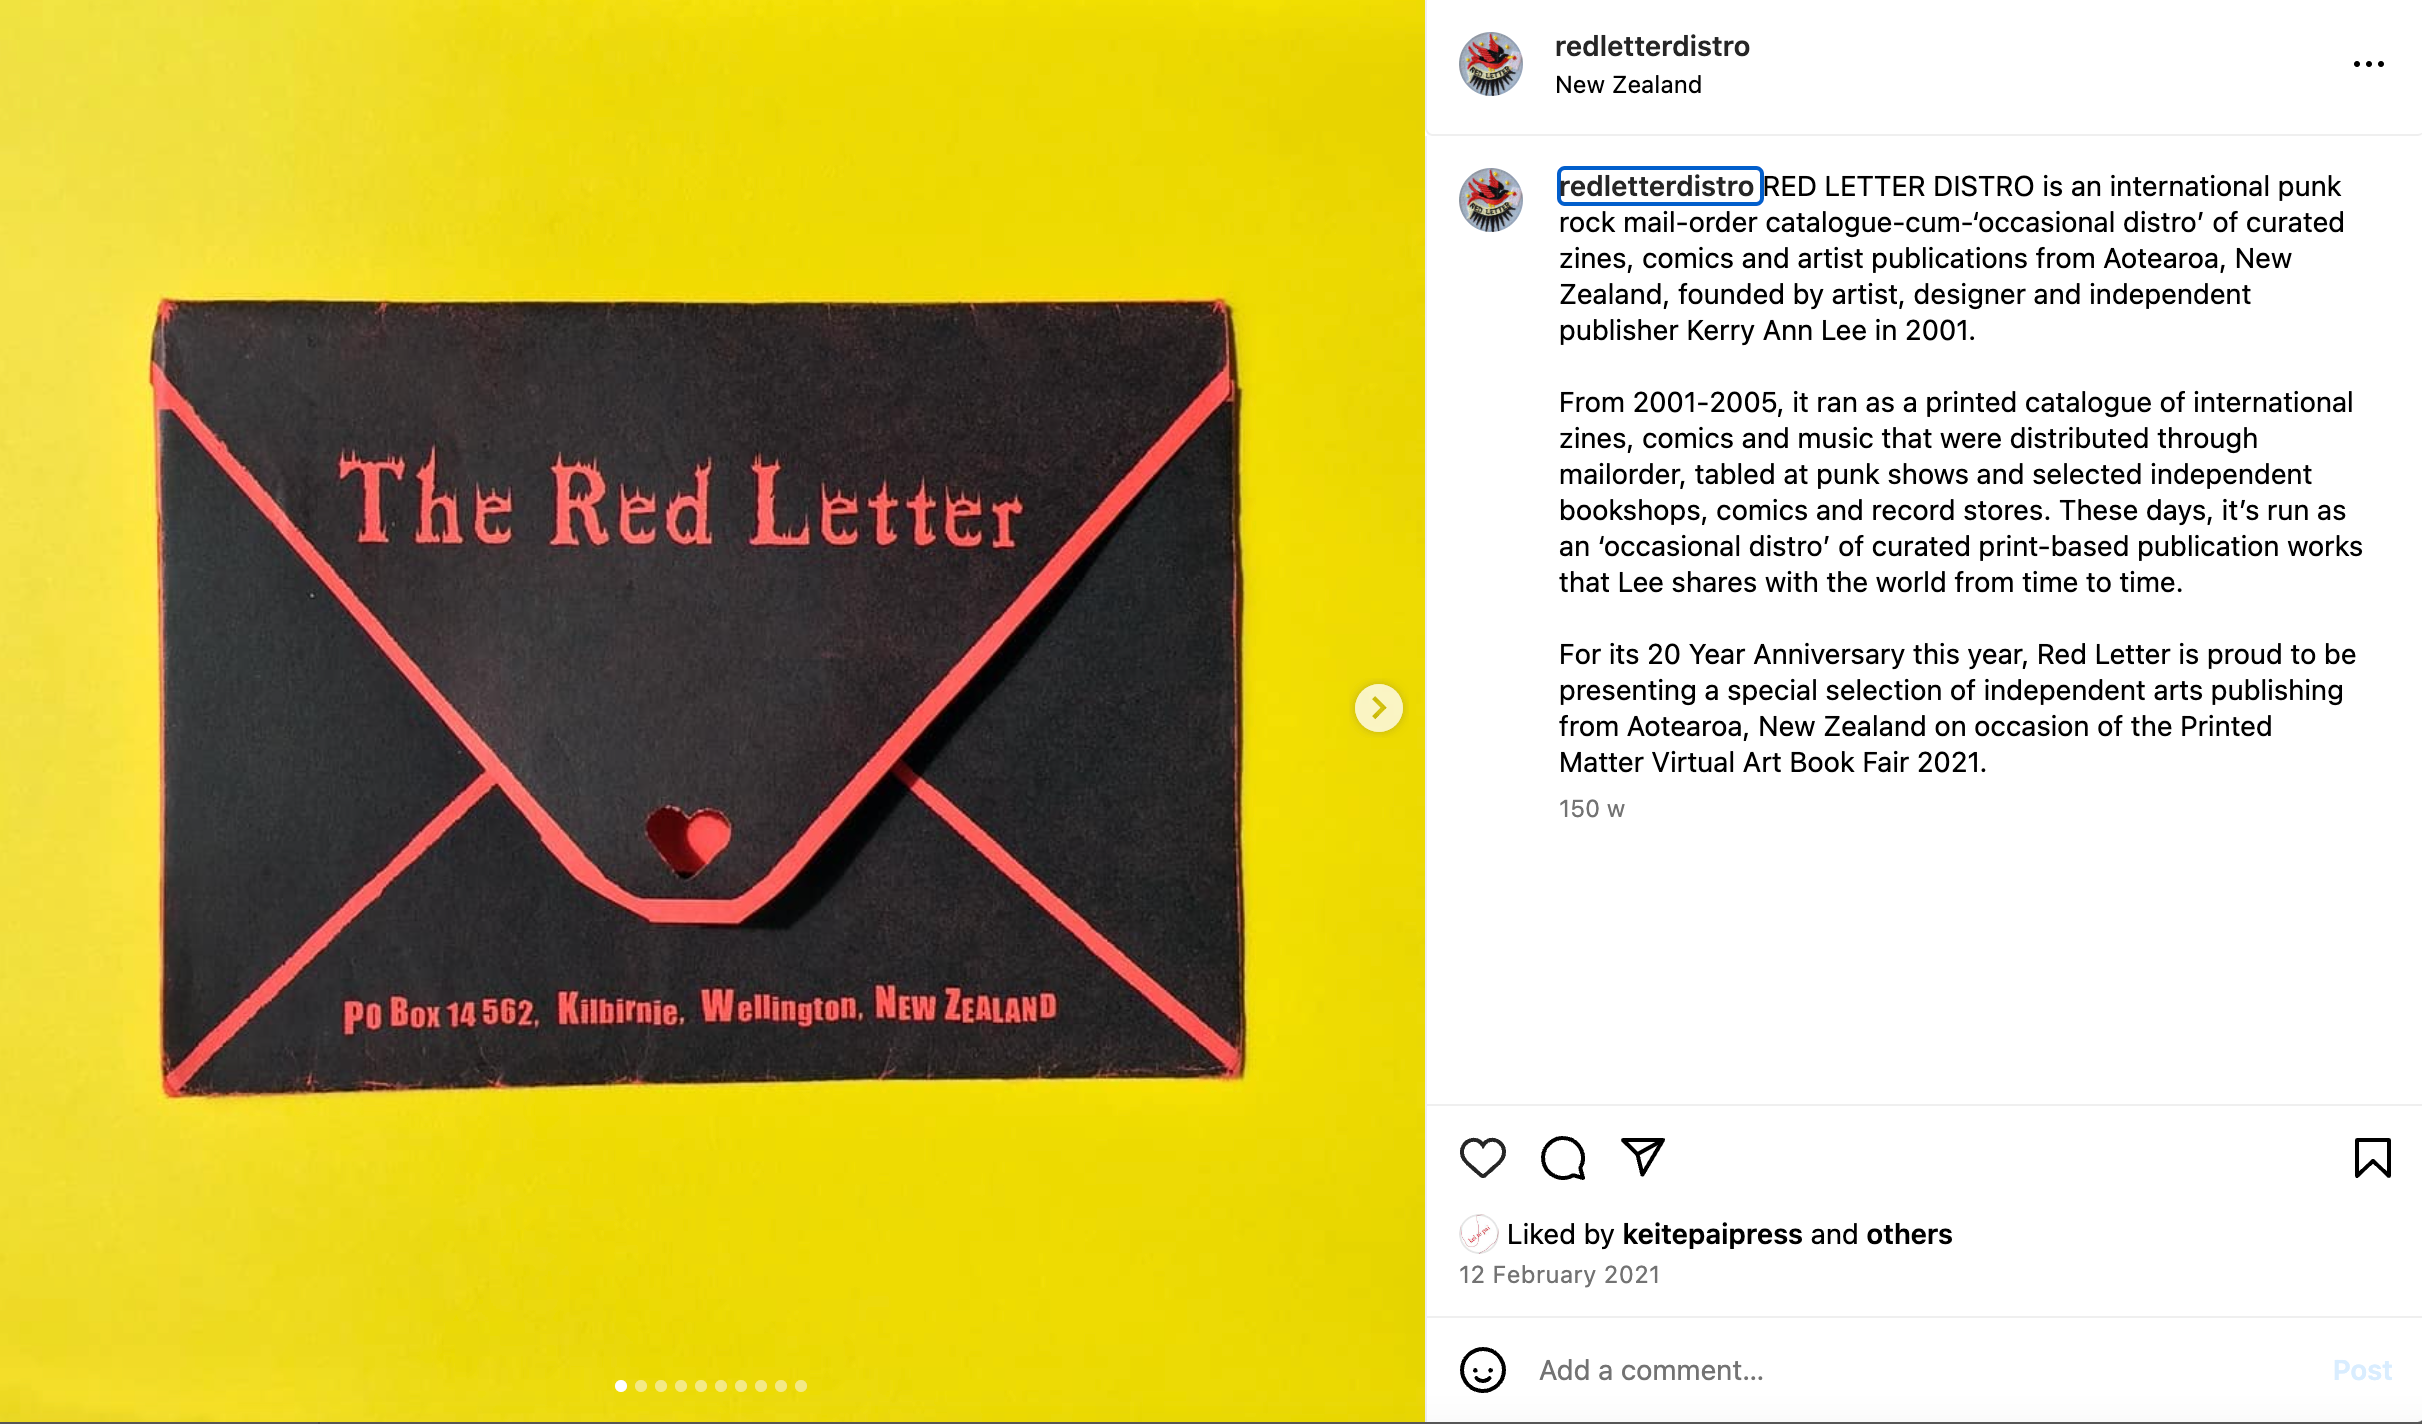 A black envelope with red accents and "Red Letter Distro" written in red on a yellow background